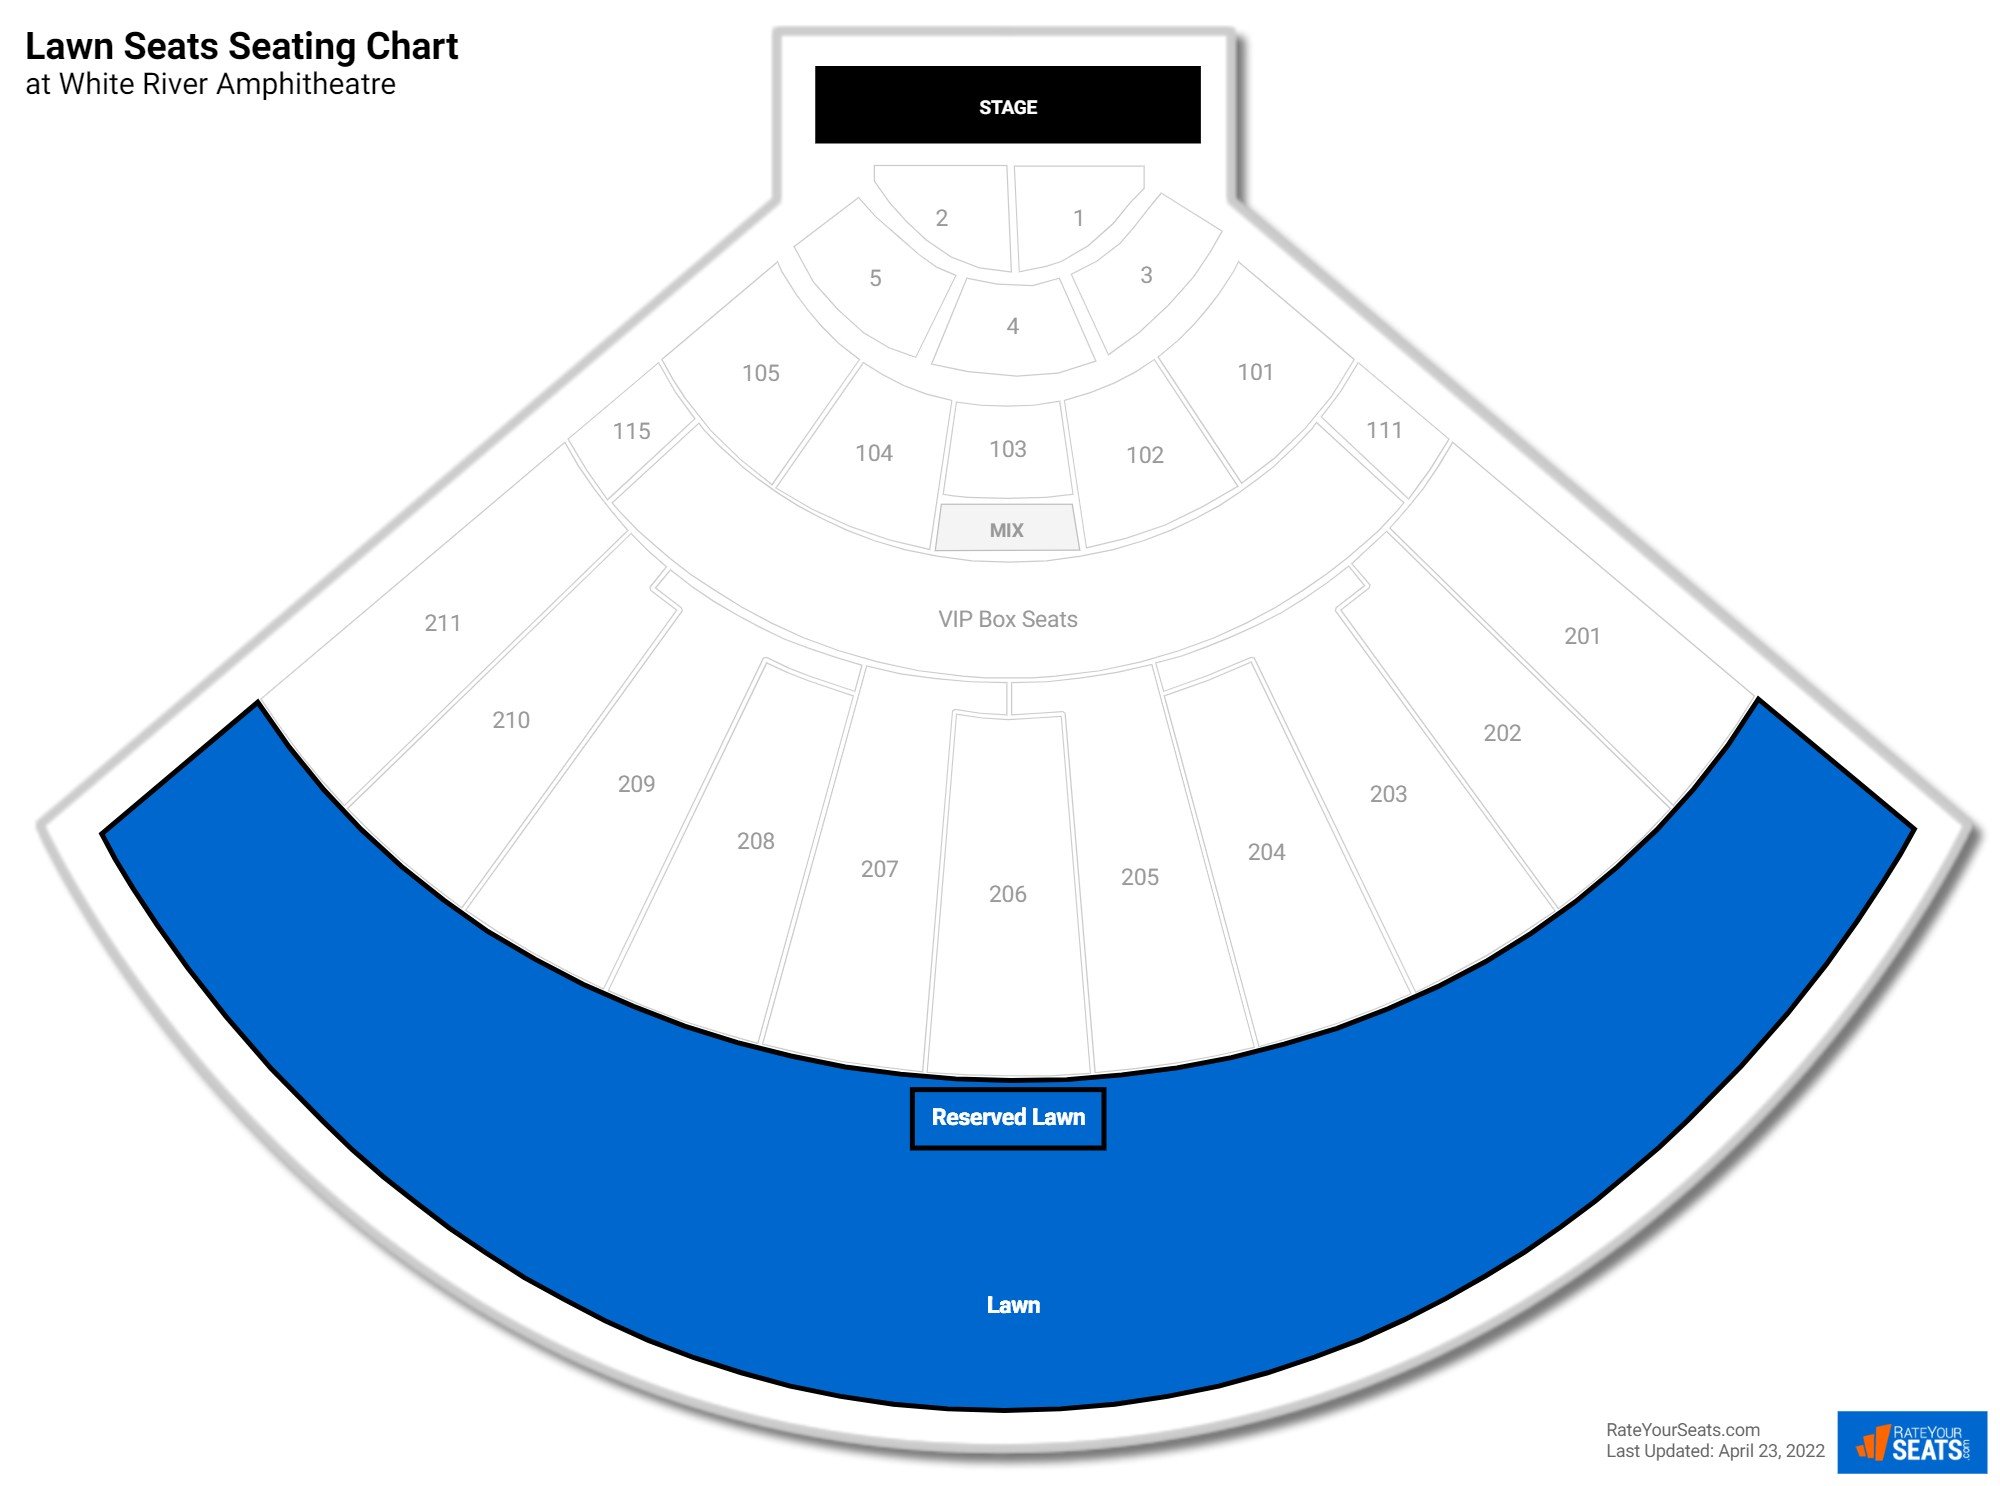 Concert Lawn Seats Seating Chart at White River Amphitheatre